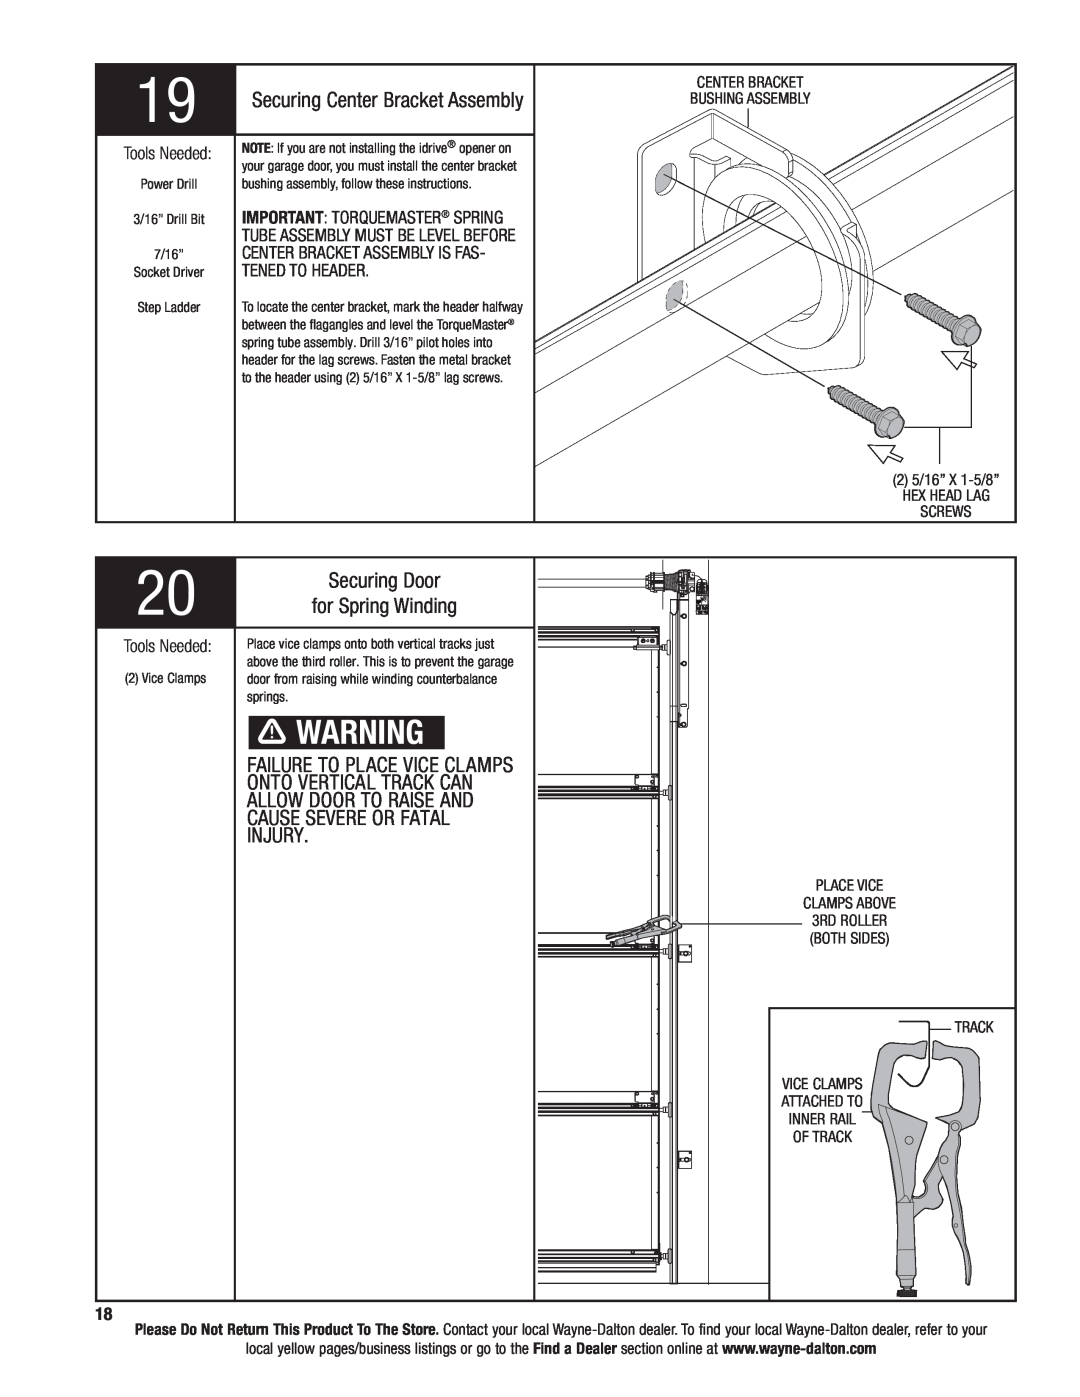 Wayne-Dalton 9300 2019, Onto Vertical Track Can, Allow Door To Raise And, Securing Center Bracket Assembly 